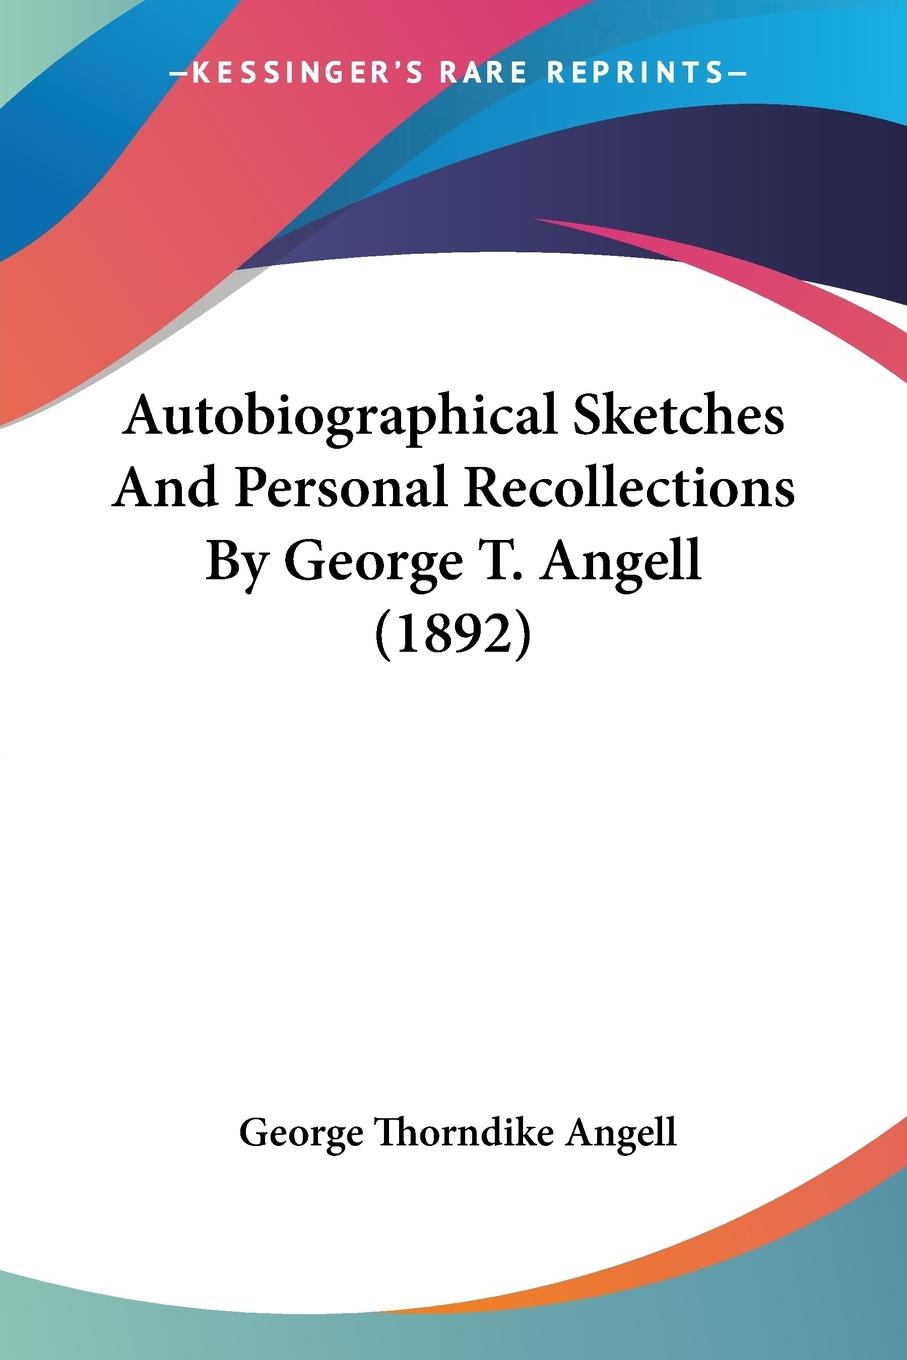 Autobiographical Sketches And Personal Recollections By George T. Angell (1892) - Angell, George Thorndike